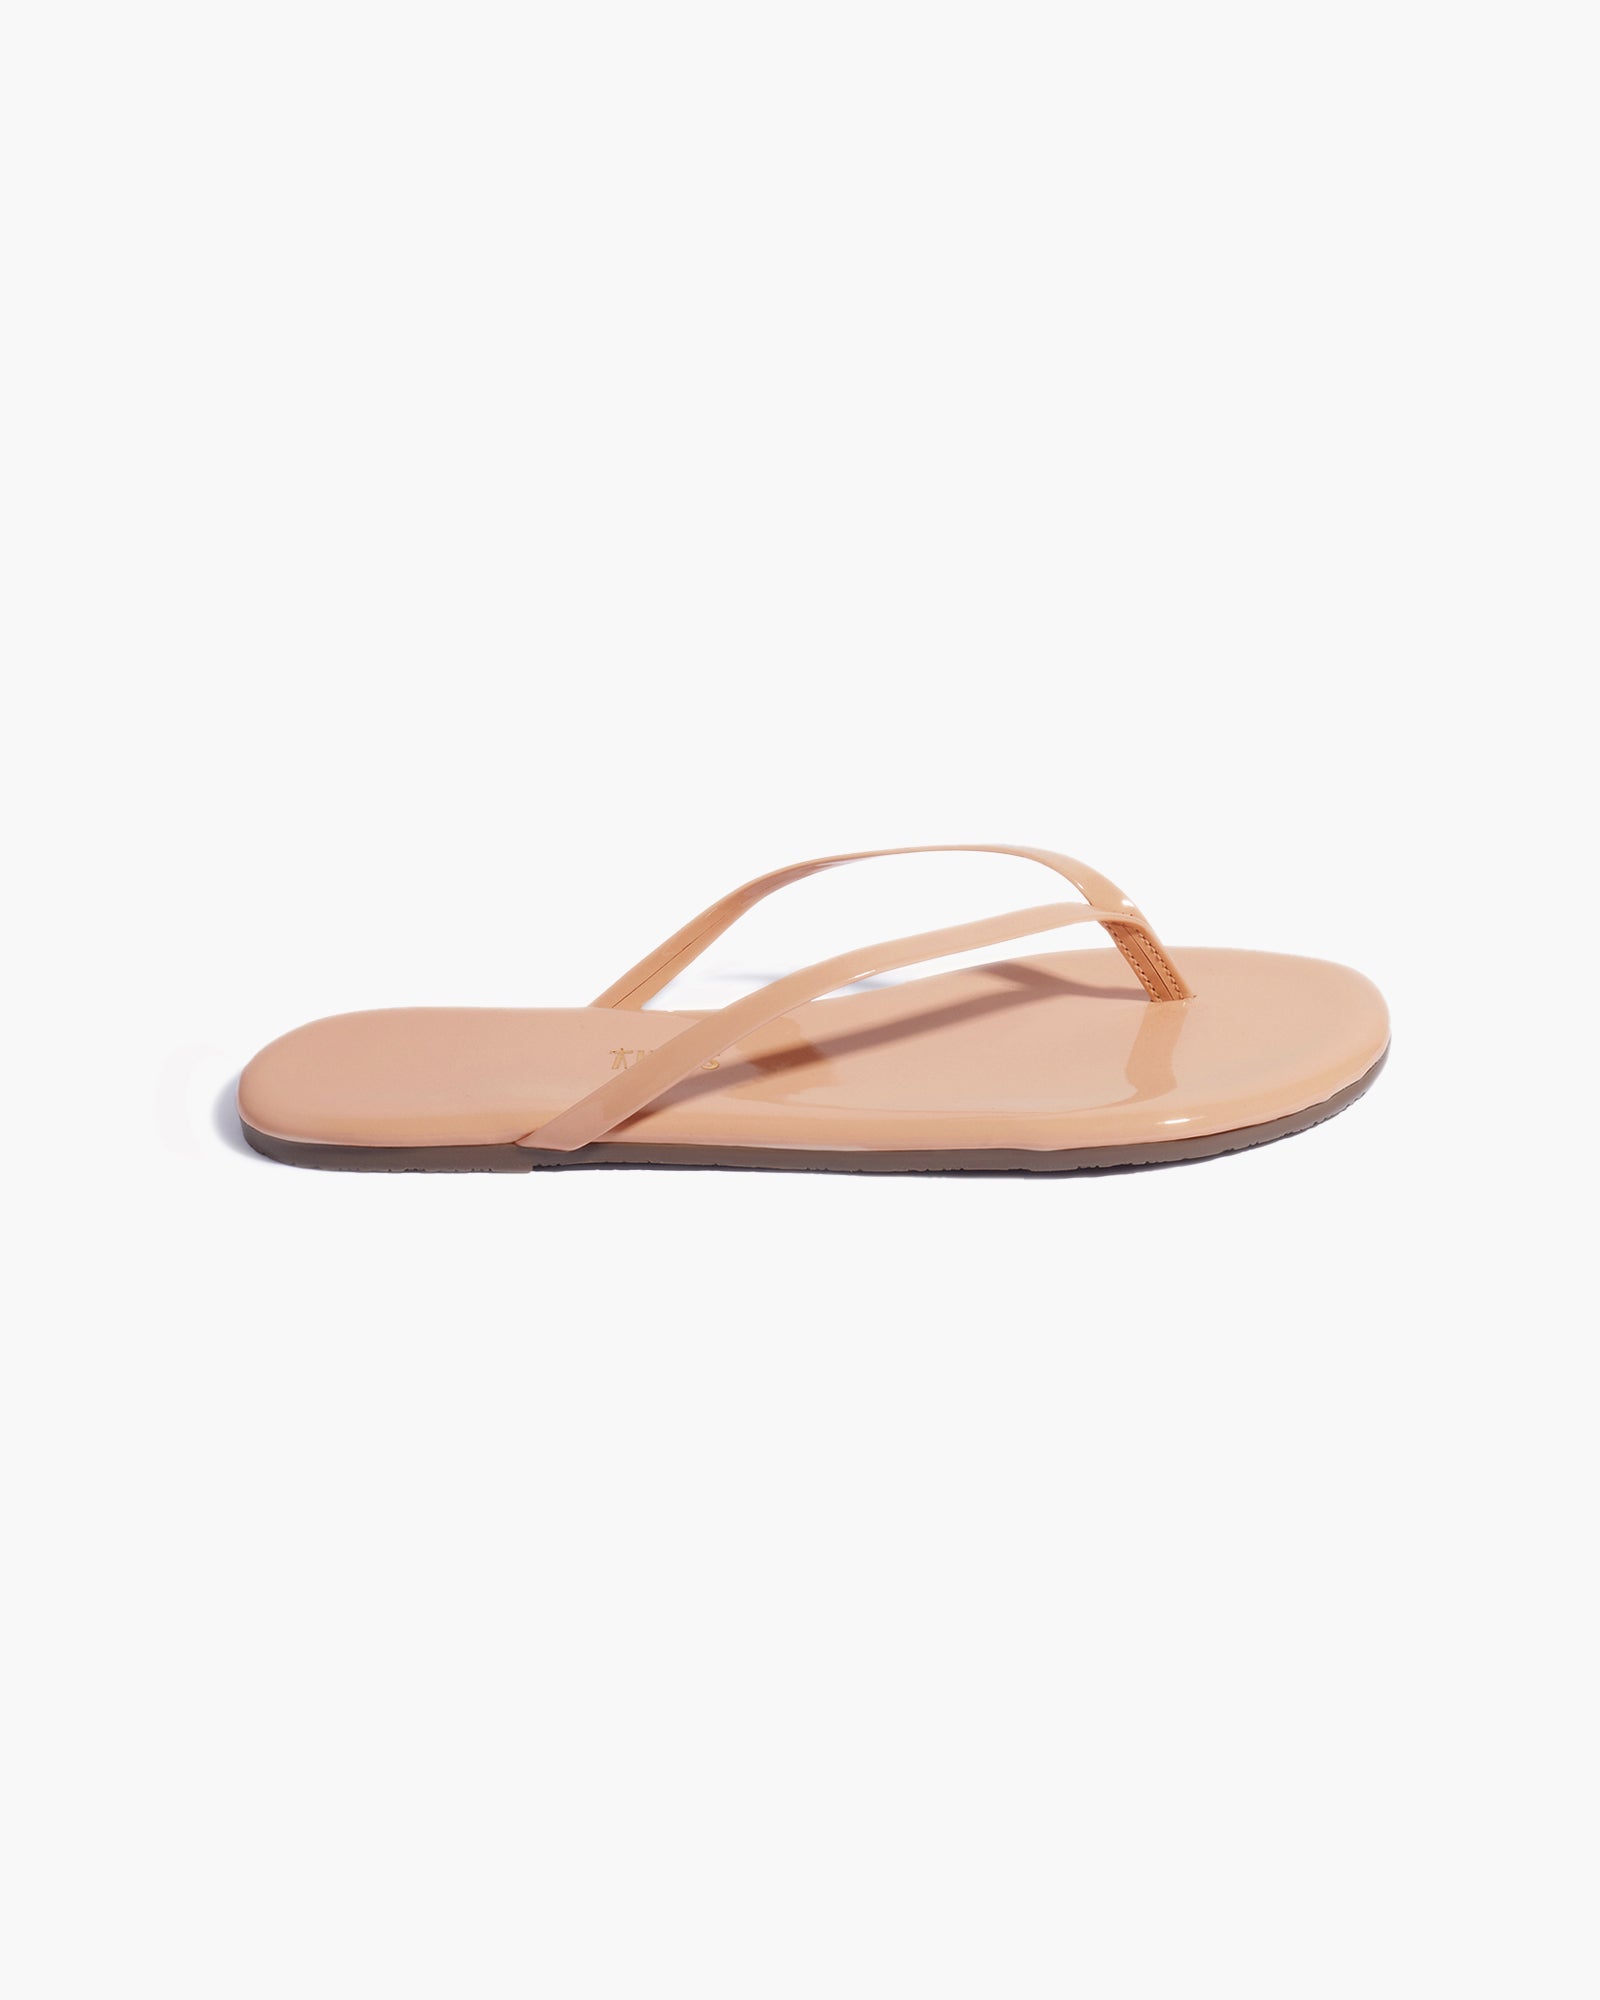 Lily Glosses in Sunkissed | Women's Sandals | TKEES – TKEES